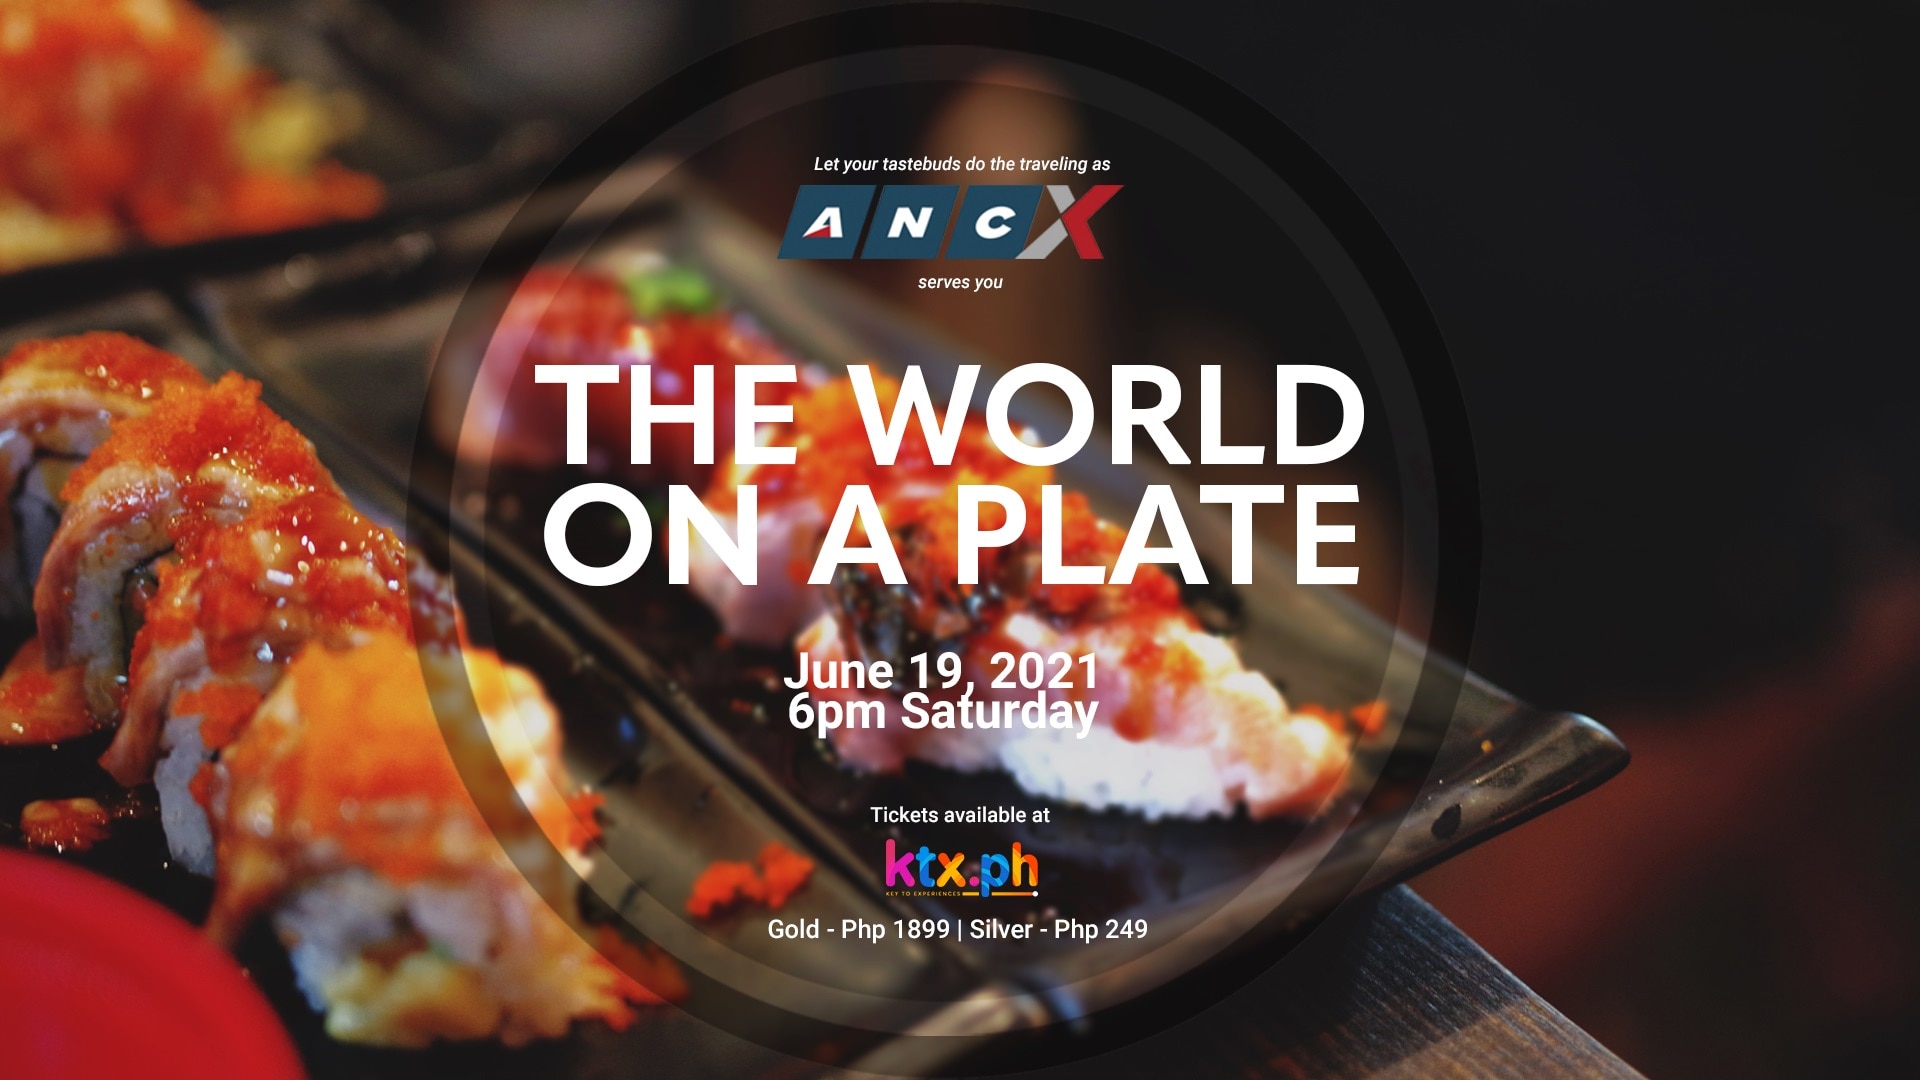 Go on a gastronomic tour around the globe via ANCX “The World on a Plate” digital event this June 19 on KTX ph_